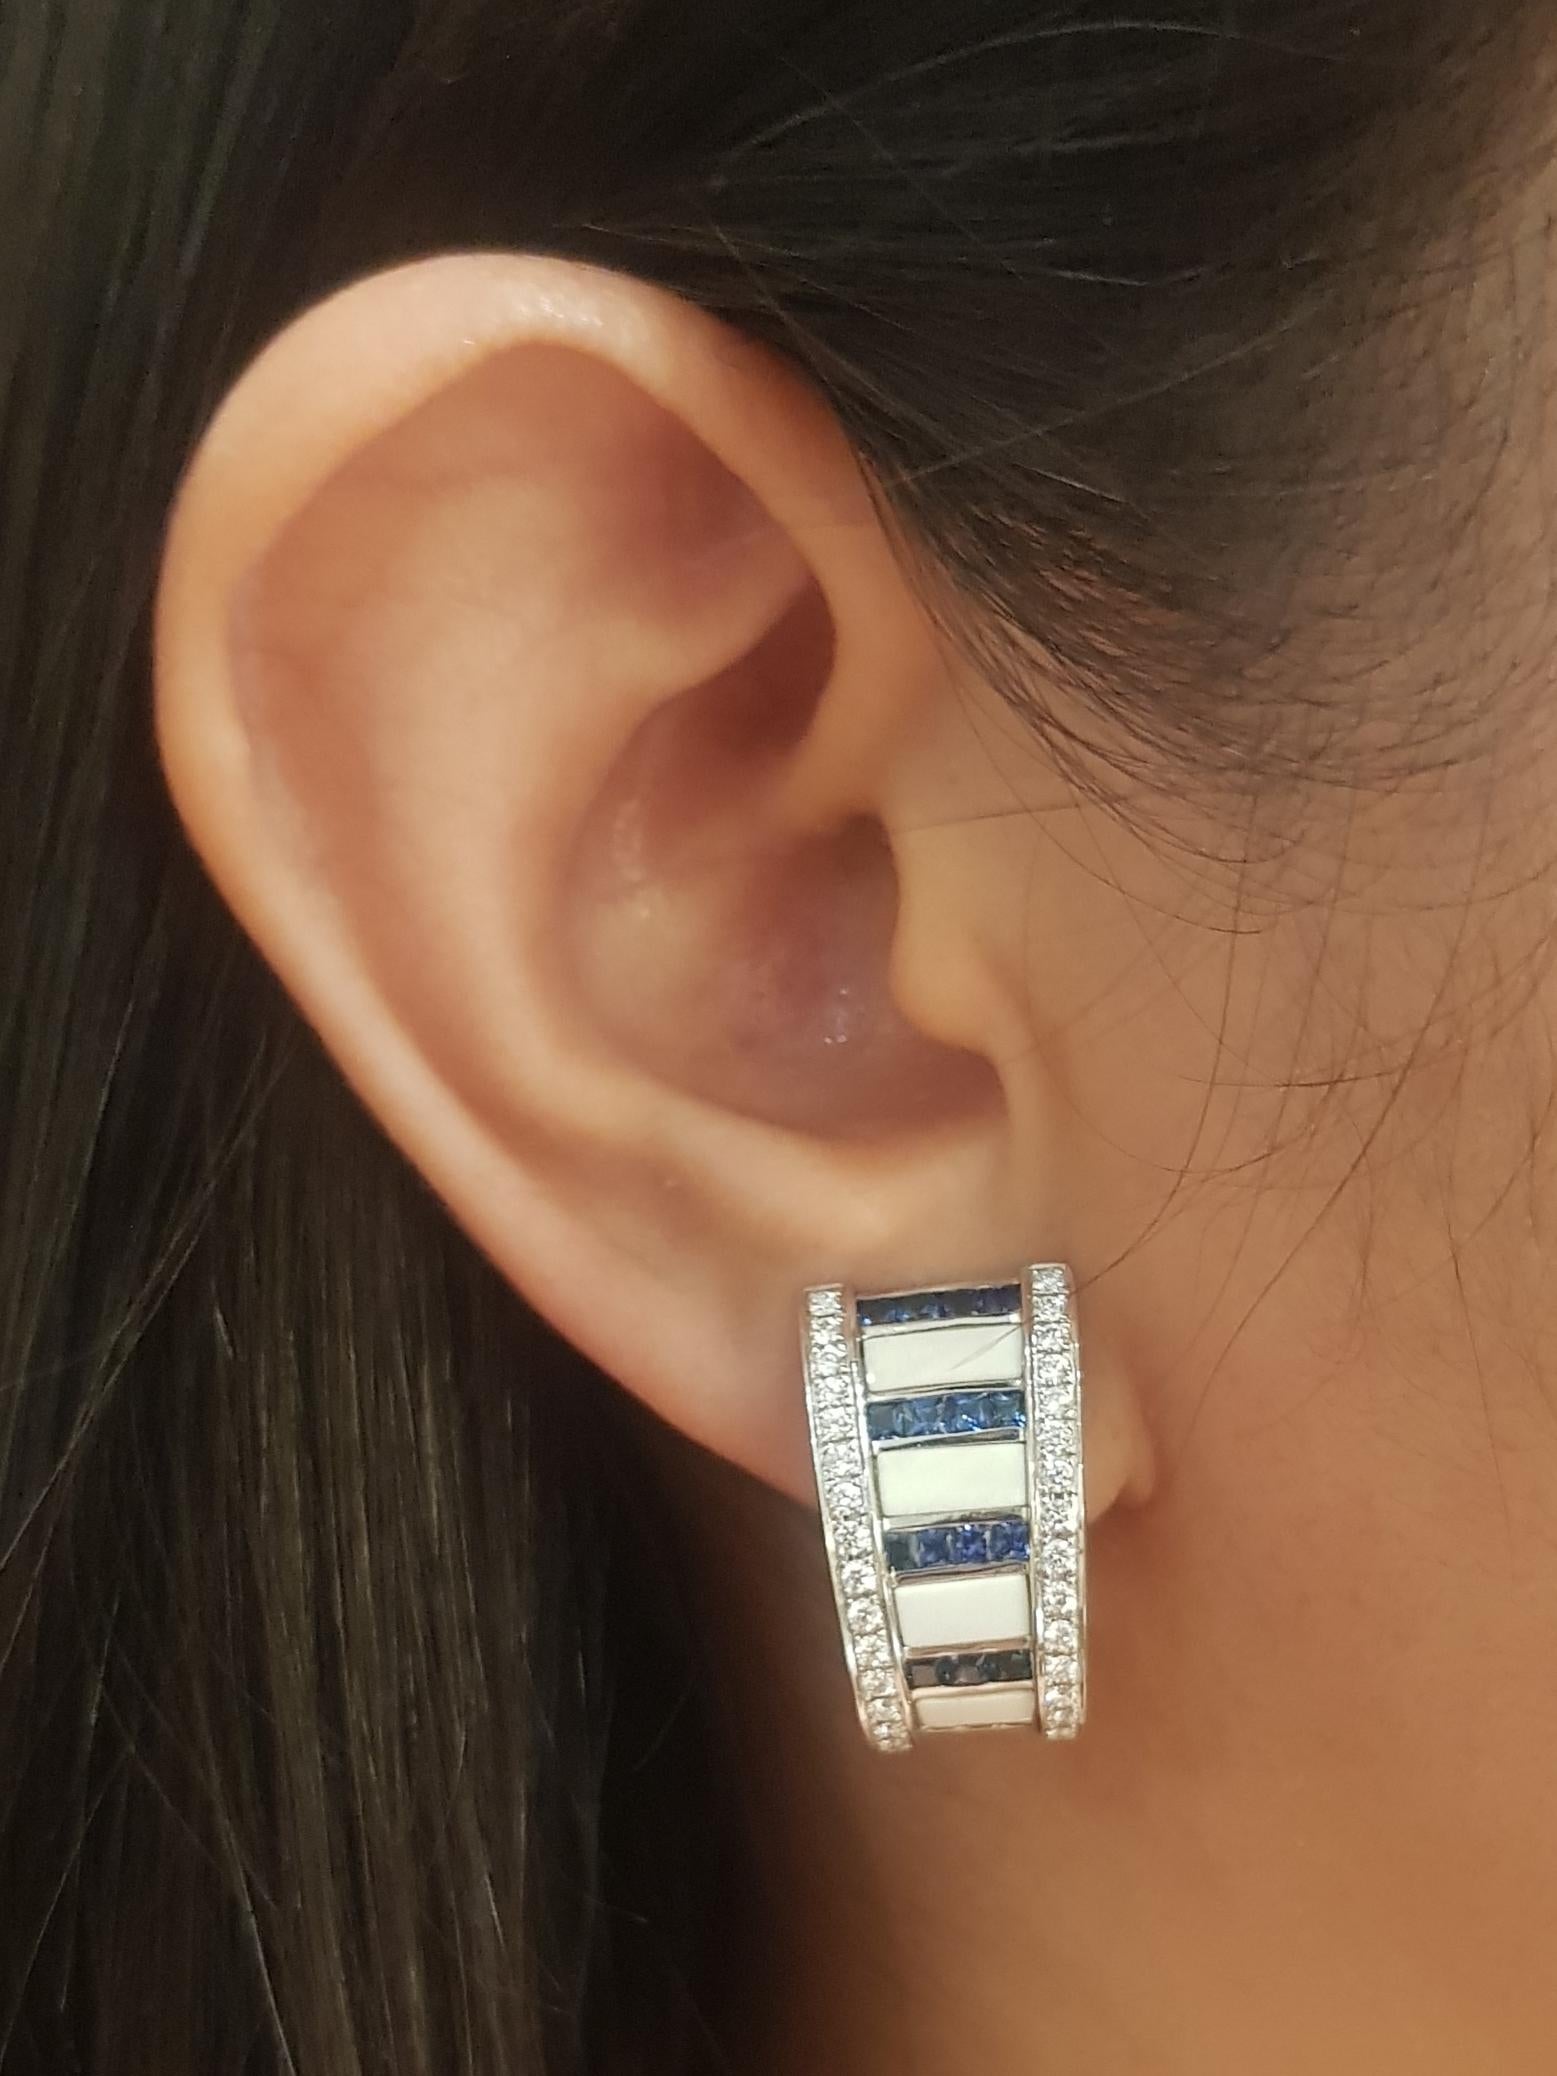 White Agate, Blue Sapphire 1.95 carats and Diamond 0.81 carat Earrings set in 18K White Gold Settings

Width: 1.2 cm 
Length: 2.2 cm
Total Weight: 16.96 grams

